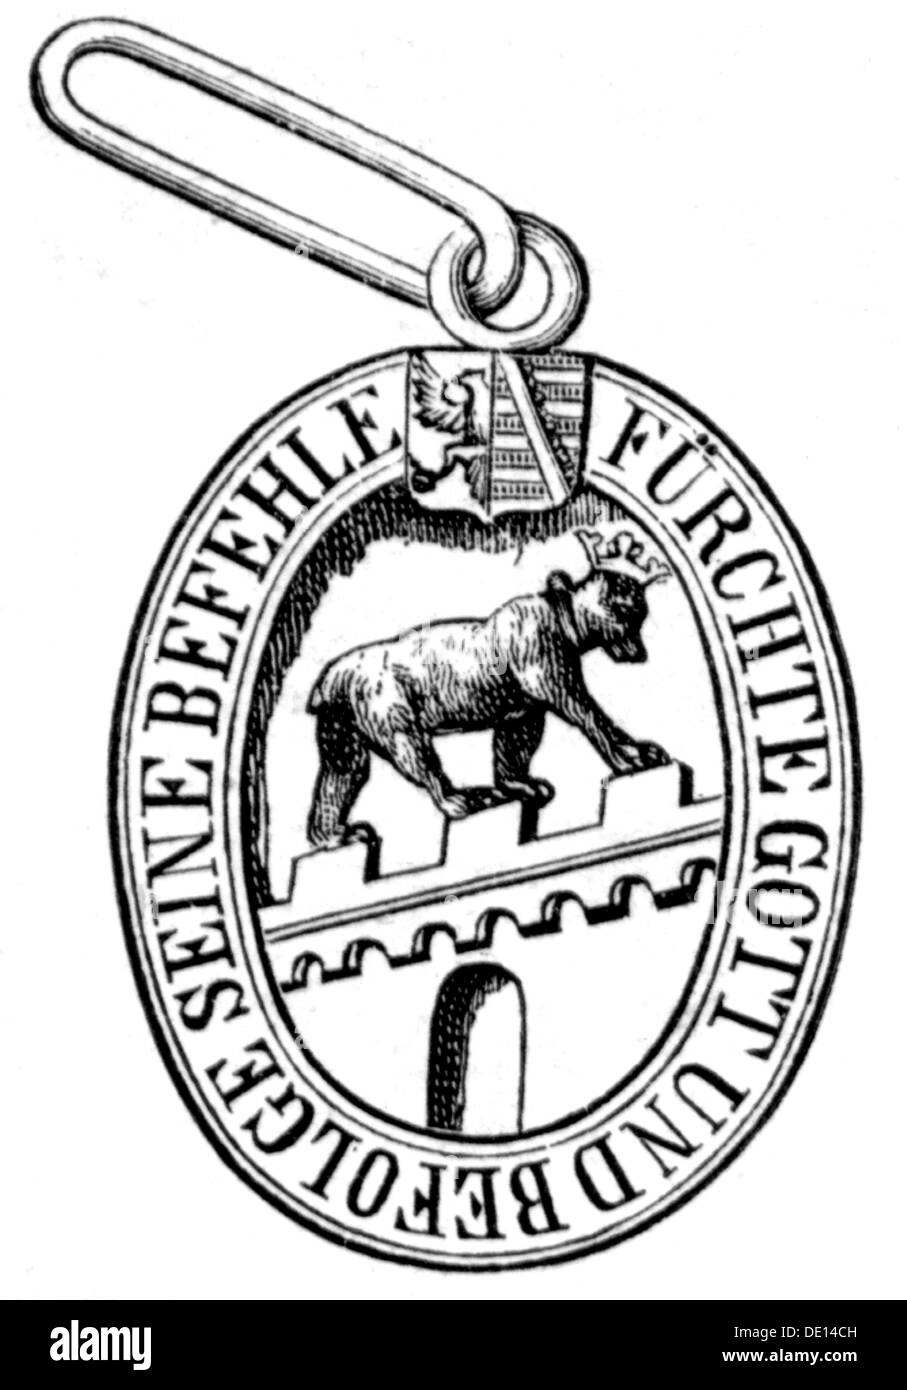 medals and decorations, Germany, Anhalt, House Order of Albert the Bear, founded 18.11.1836 by Duke Henry of Anhalt-Koethen, Duke Leopold IV of Anhalt-Dessau and Duke Alexander Carl of Anhalt-Bernburg, badge, wood engraving, 2nd half 19th century, Ascanians, Duchy of Anhalt - Köthen, Duchy of Anhalt - Dessau, Duchy of Anhalt - Bernburg, Albrecht, medal, decoration, medals, decorations, bear, bears, founded, founding, historic, historical, Heinrich, Anhalt-Koethen, Anhalt-Köthen, Anhalt-Kothen, Koethen, Köthen, Kothen, Additional-Rights-Clearences-Not Available Stock Photo